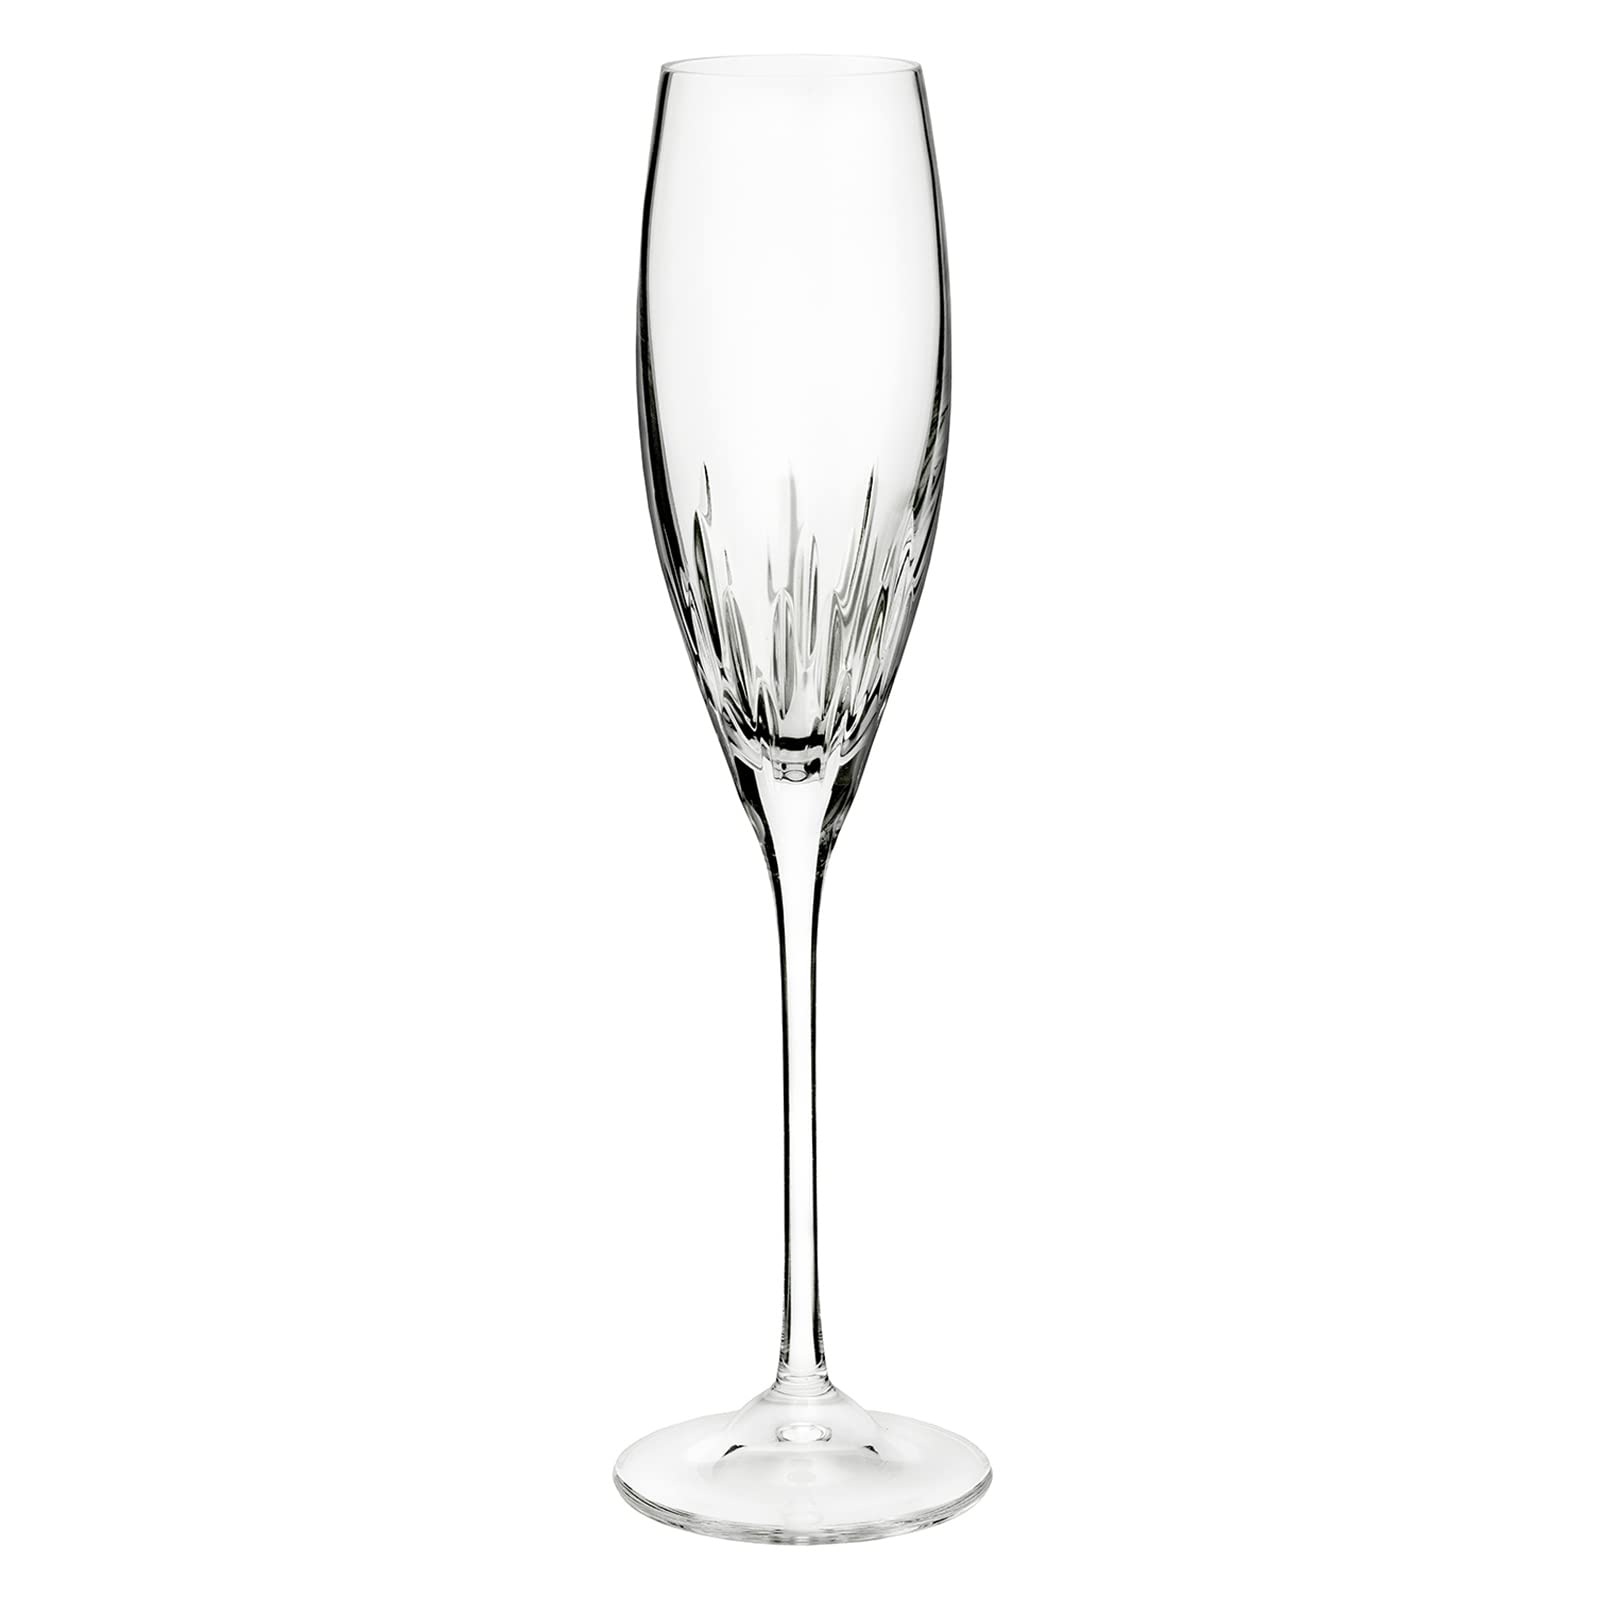 Vera Wang for Wedgwood Duchesse Champagne Flute, 1 Count (Pack of 1), Clear  - Like New